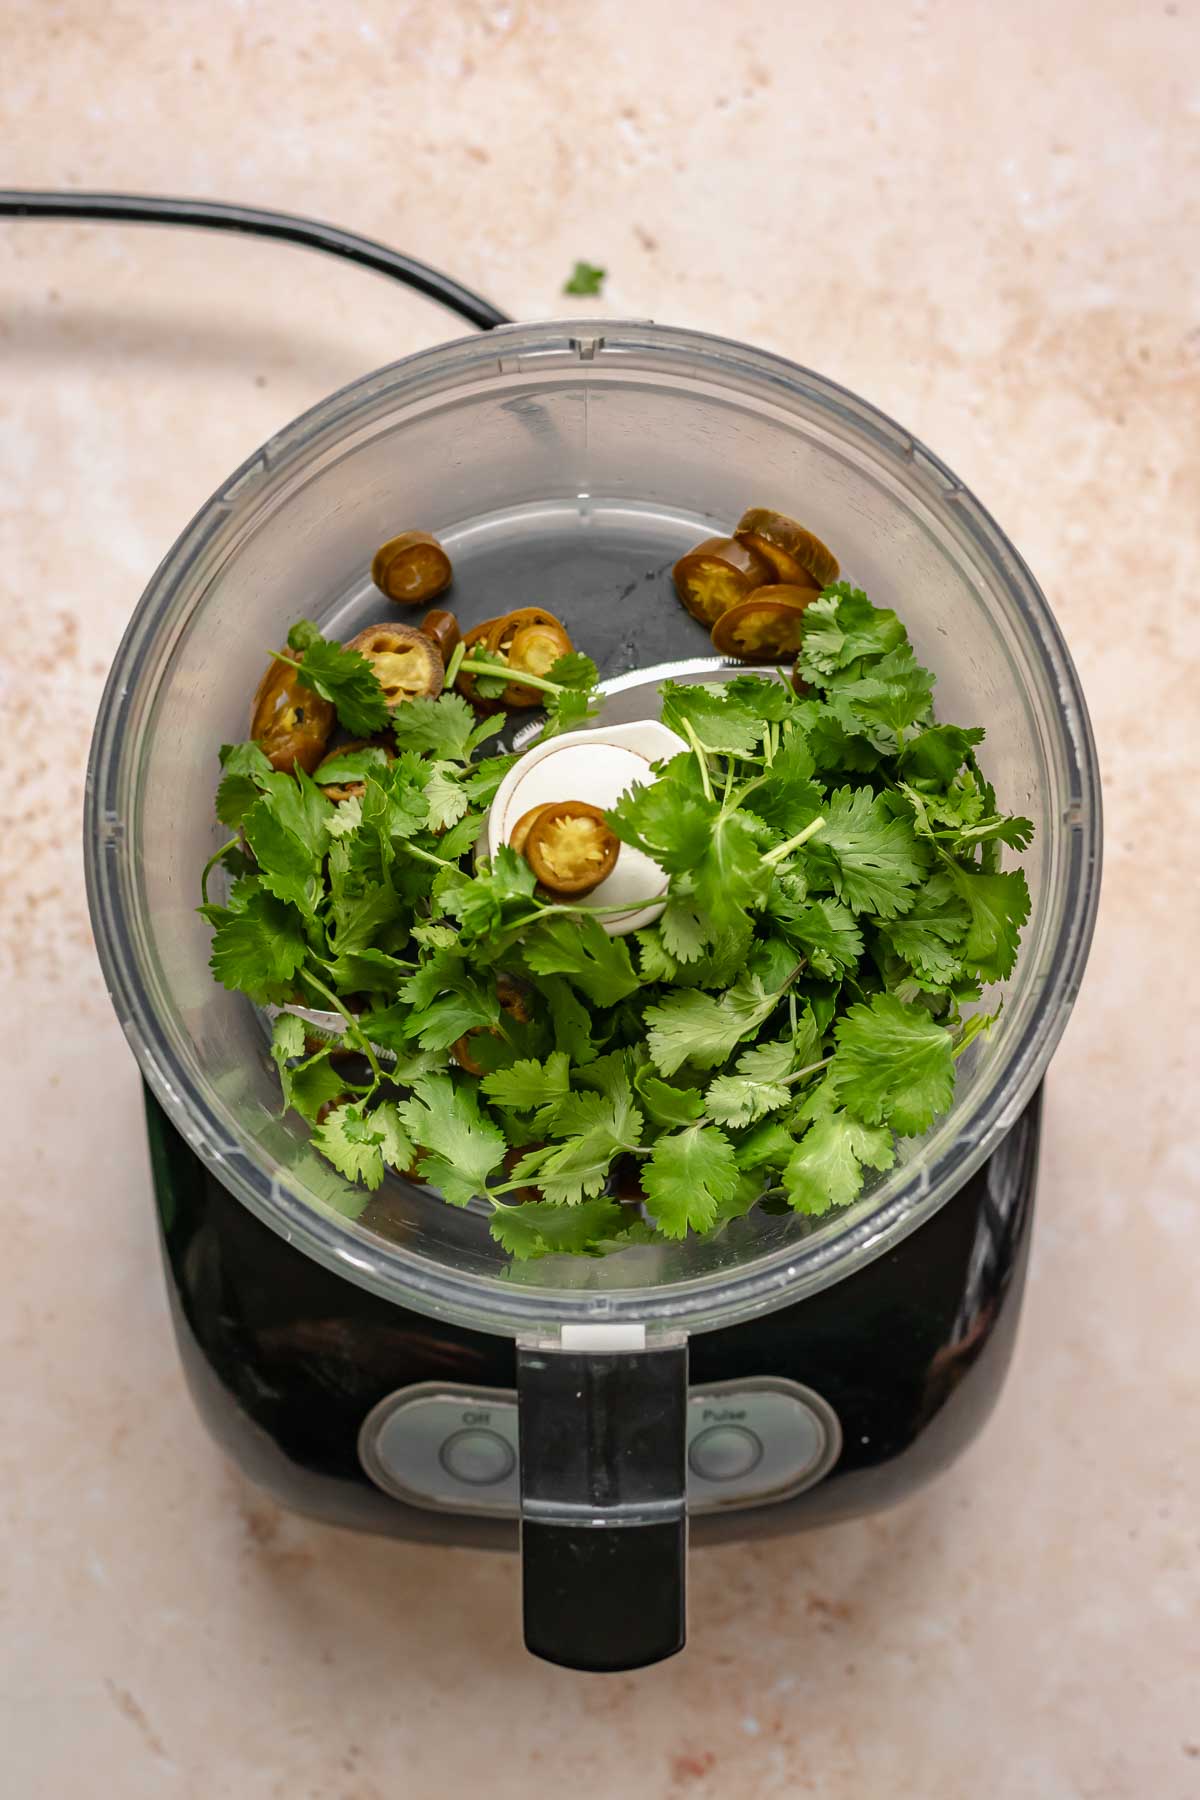 Cilantro and pickled jalapeños in a food processor.